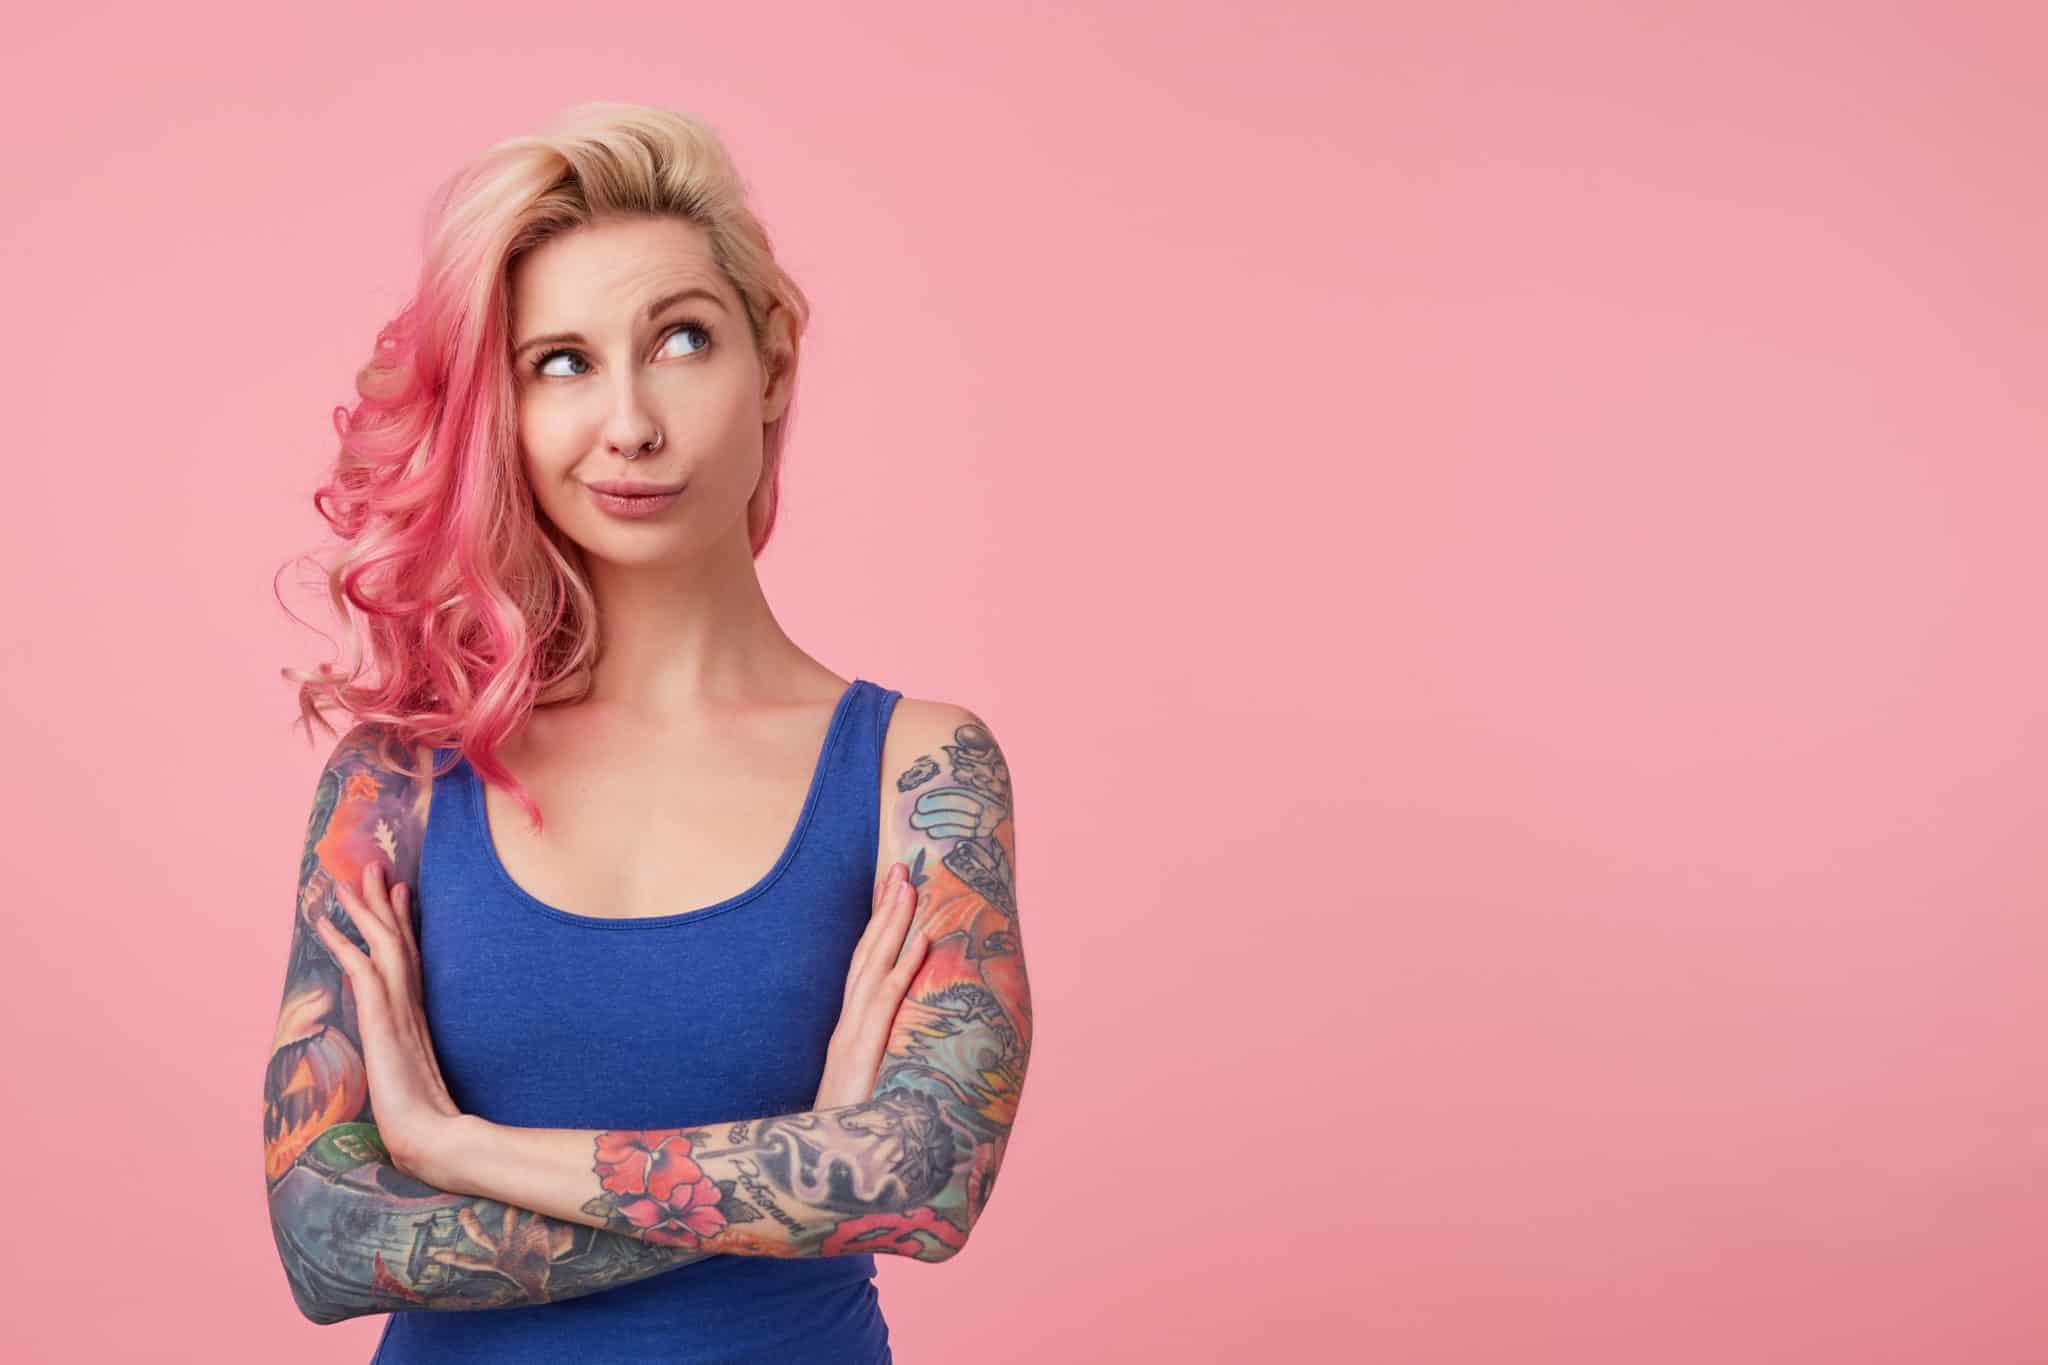 Woman with blond and pink hair and tattoed arms looking up to the right corner thinking of something.